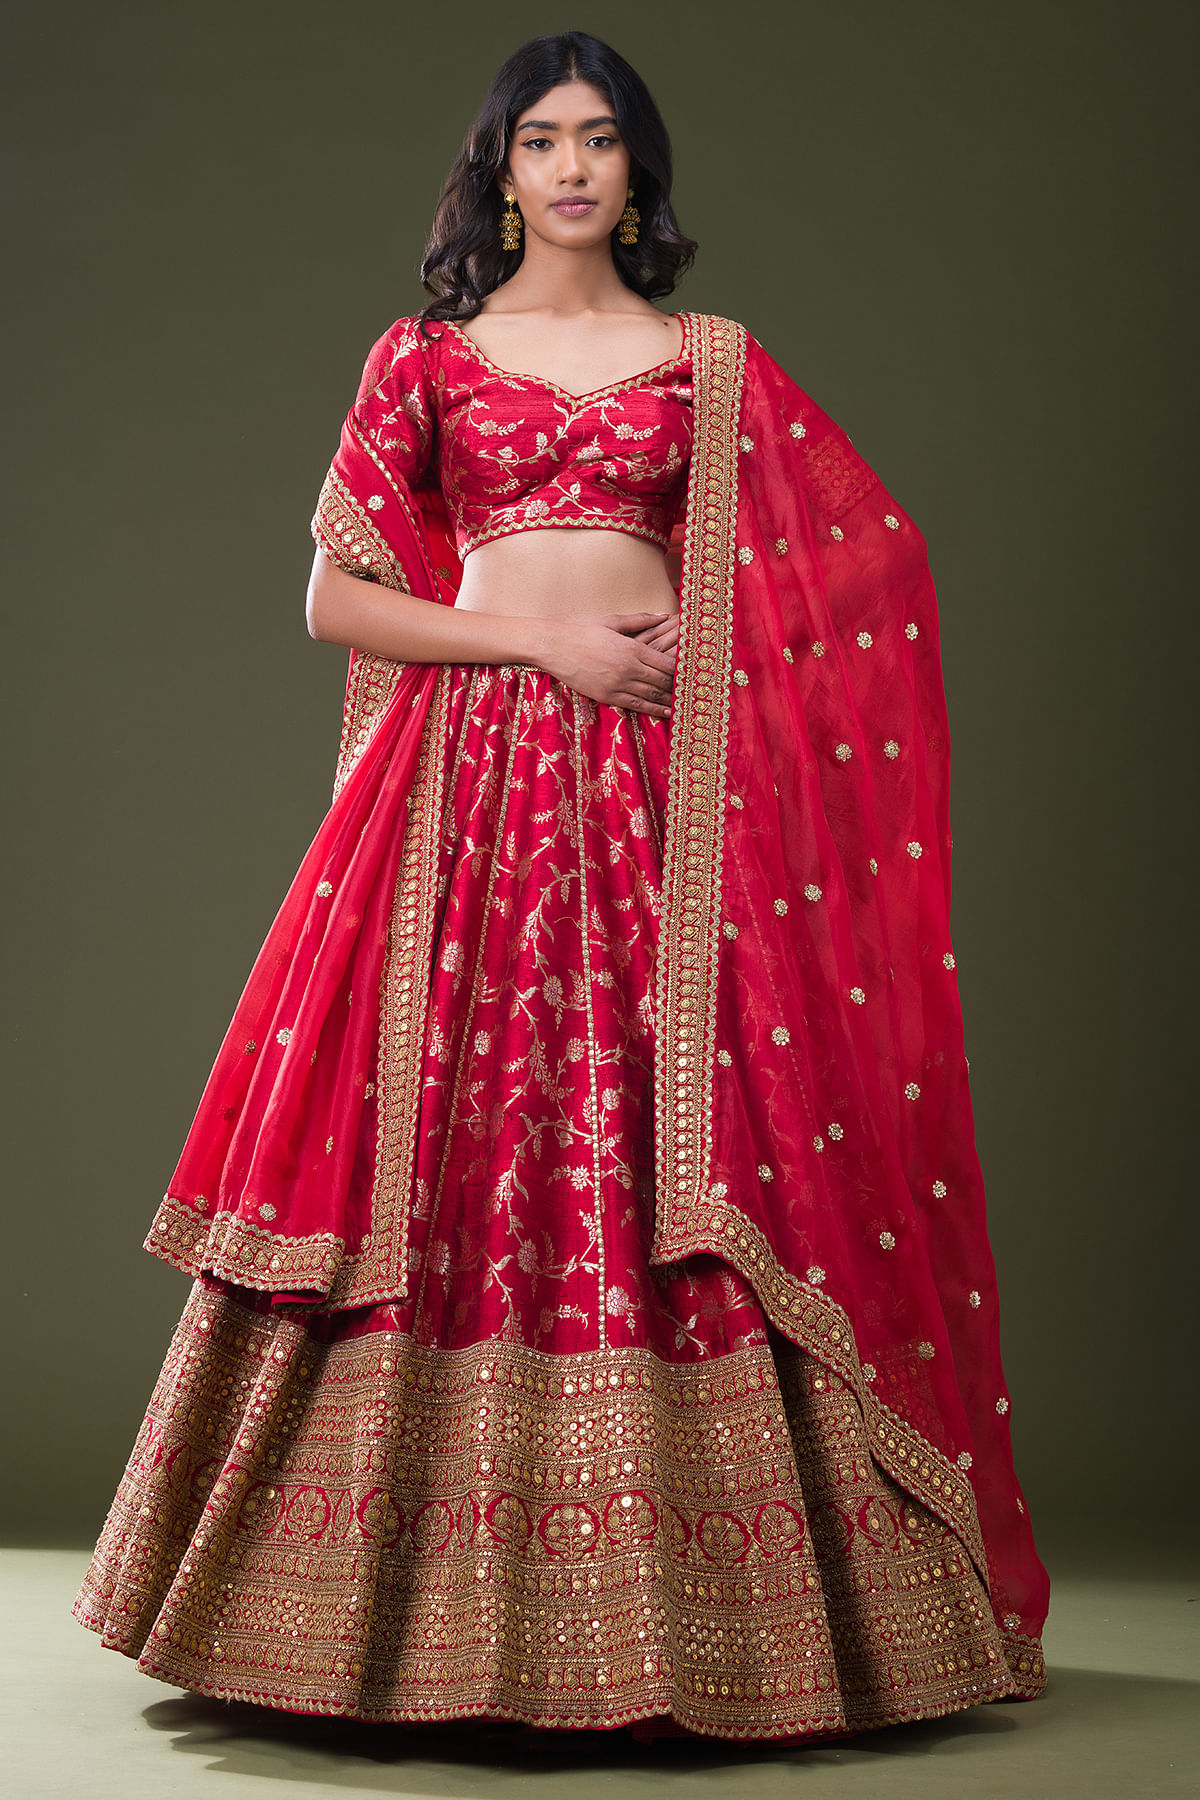 Arya Pratha 4301 Exclusive Collection Of Bridal Lehenga, this collection  fabric is velvet,